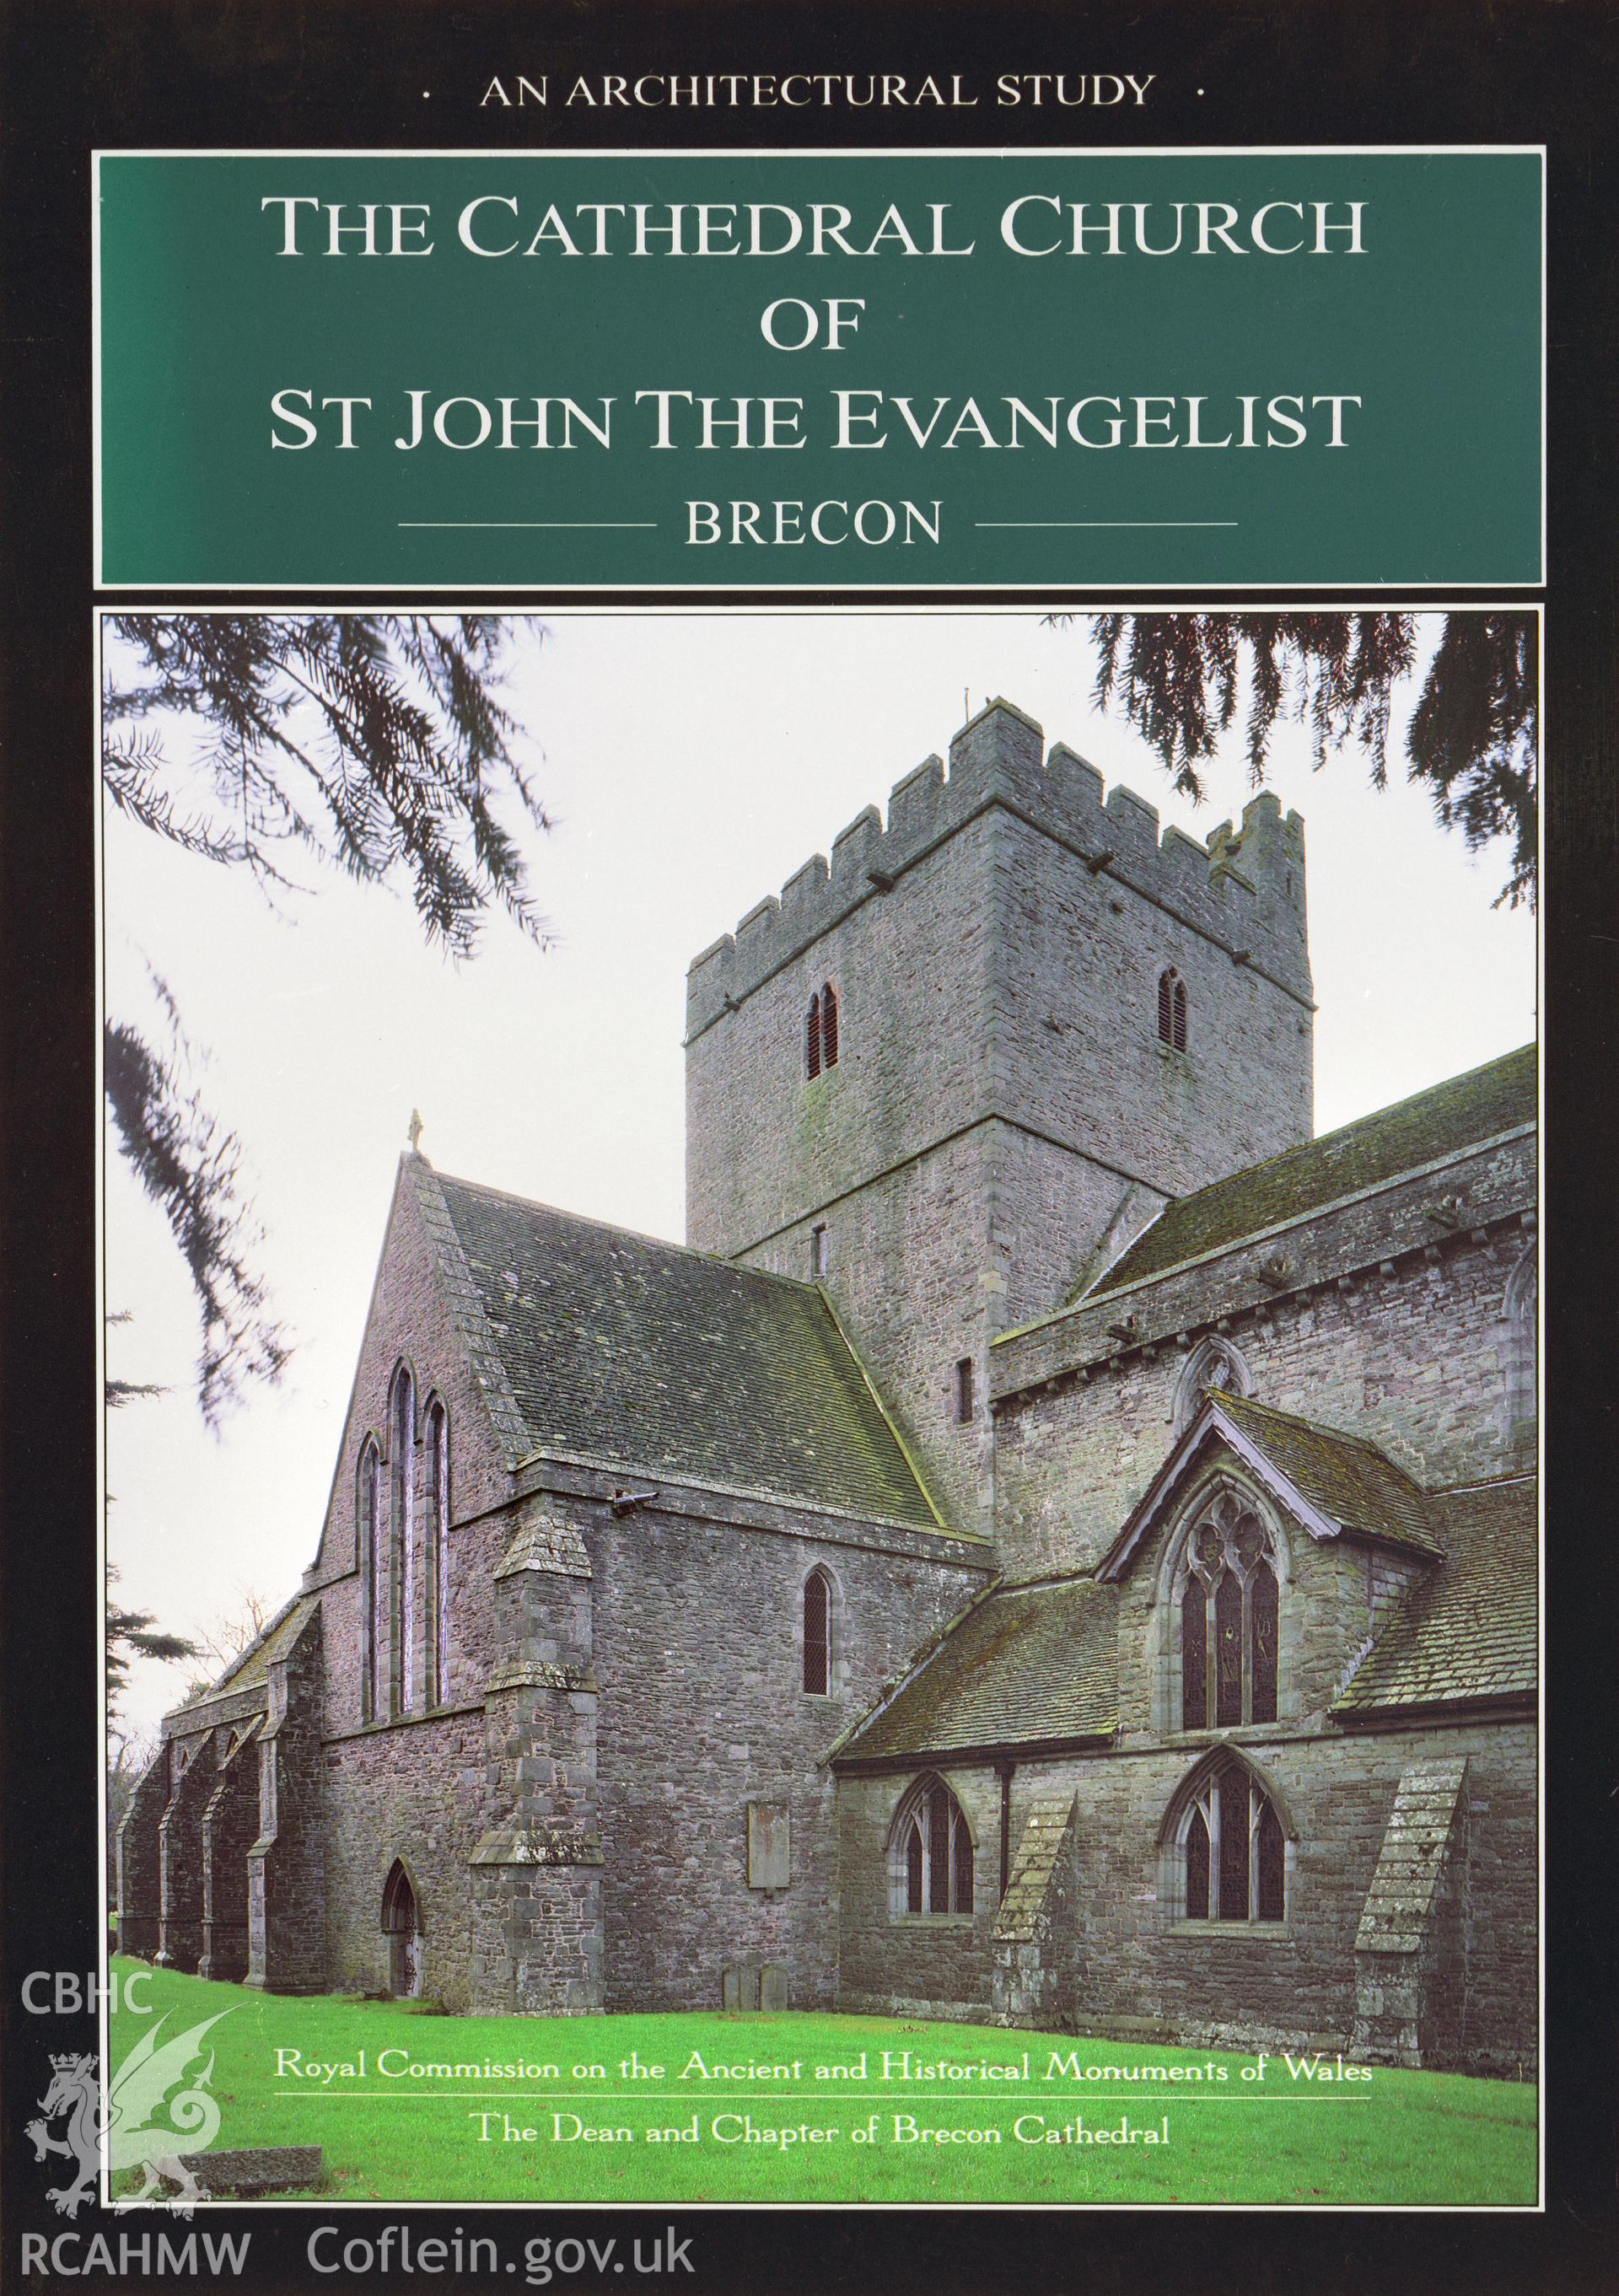 Colour transparency of the cover of the RCAHMW publication, An Architectual Study of the Cathedral Church of St. John the Evangelist, Brecon.